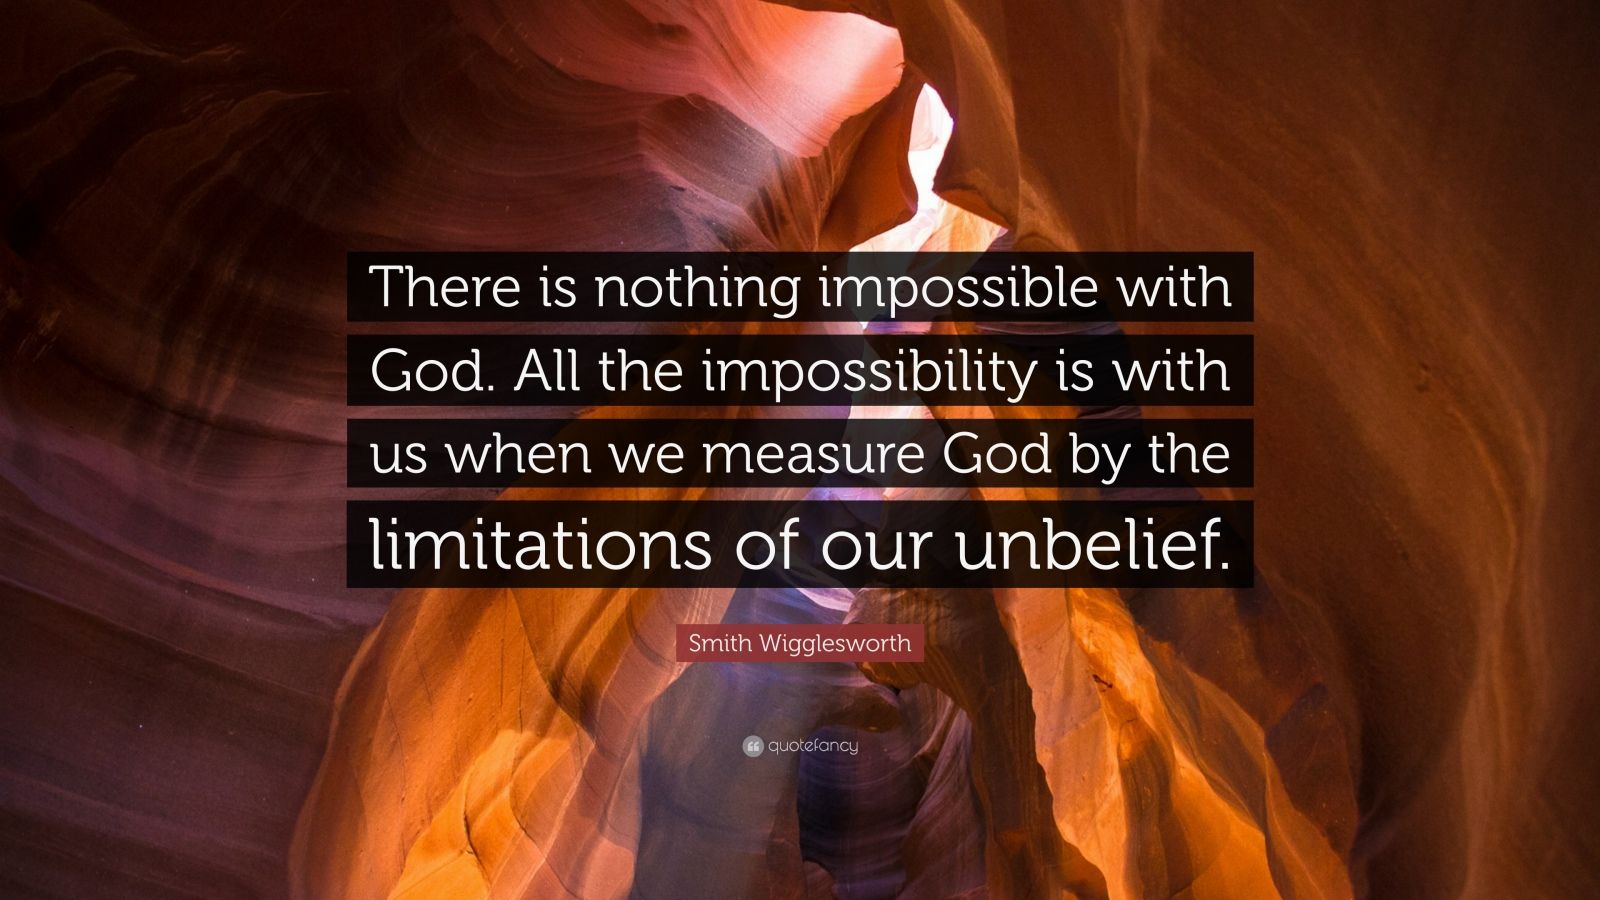 Smith Wigglesworth Quote There Is Nothing Impossible With God All The Impossibility Is With Us When We Measure God By The Limitations Of Our Unb